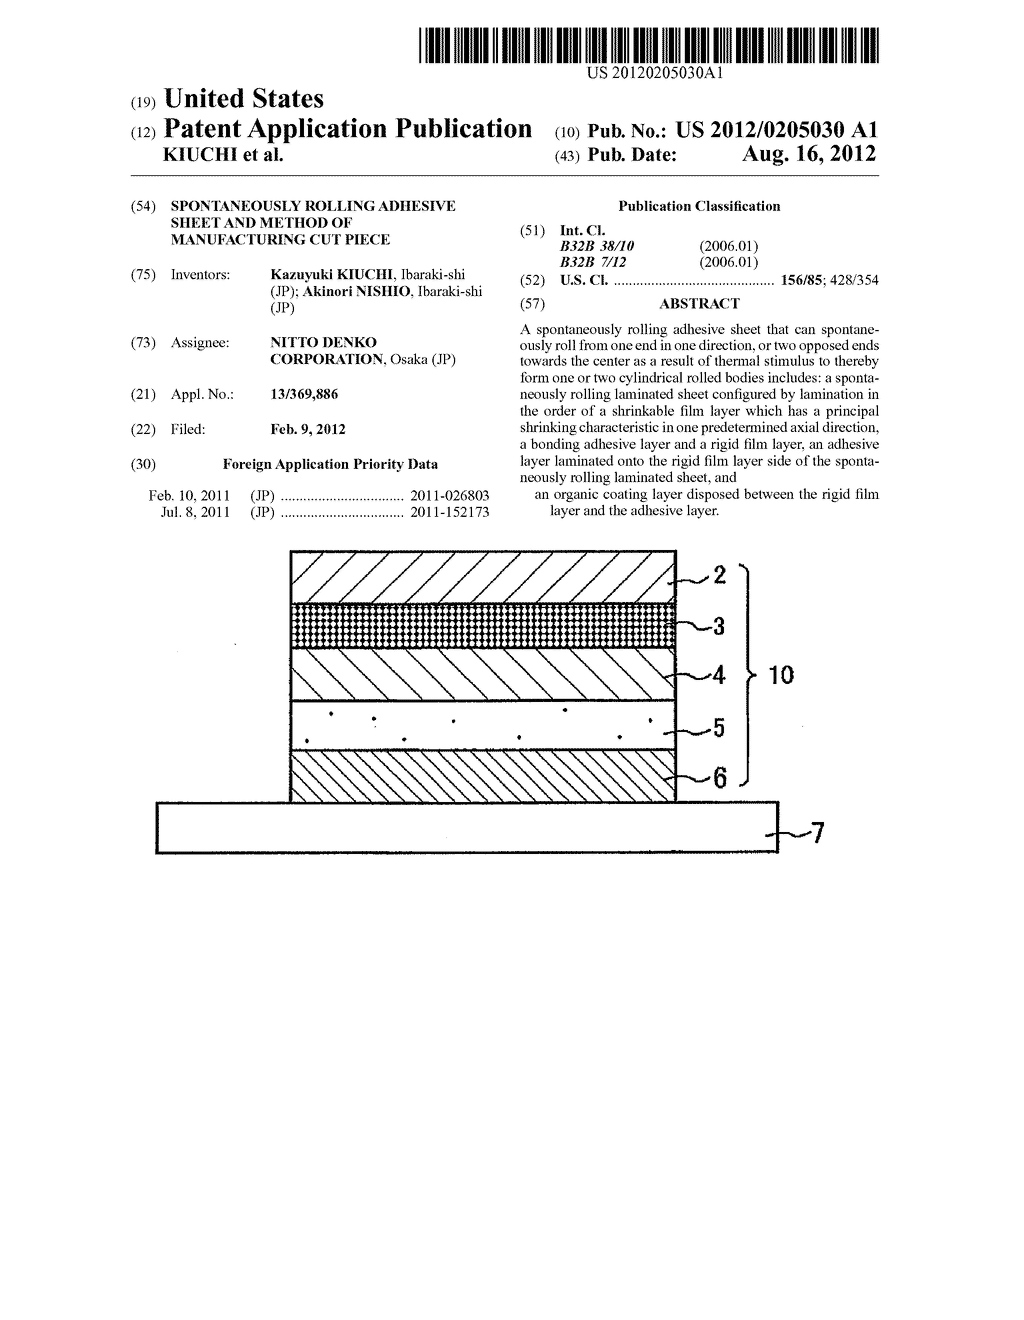 SPONTANEOUSLY ROLLING ADHESIVE SHEET AND METHOD OF MANUFACTURING CUT PIECE - diagram, schematic, and image 01